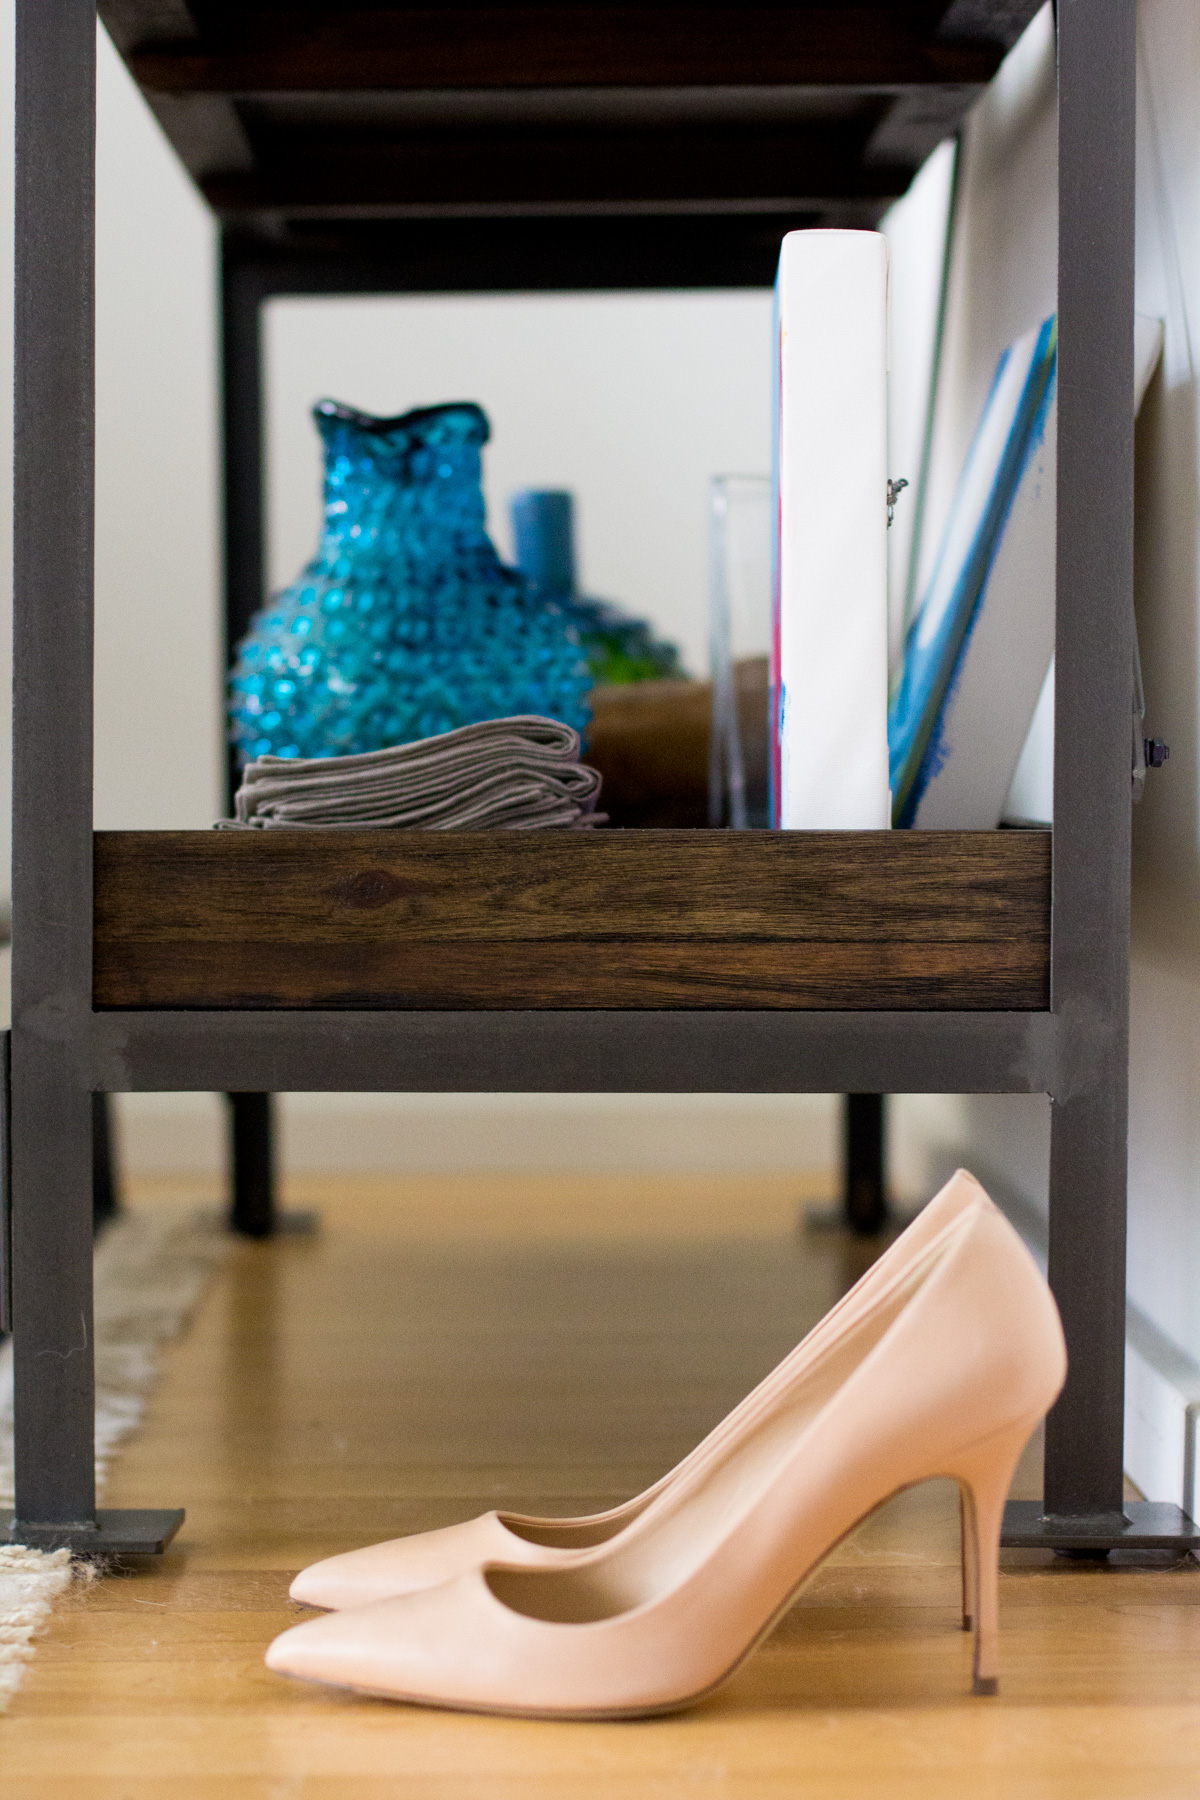 shelf styling, how to style shelves, emerson shelving, home decor, the fox and she, blair culwell staky